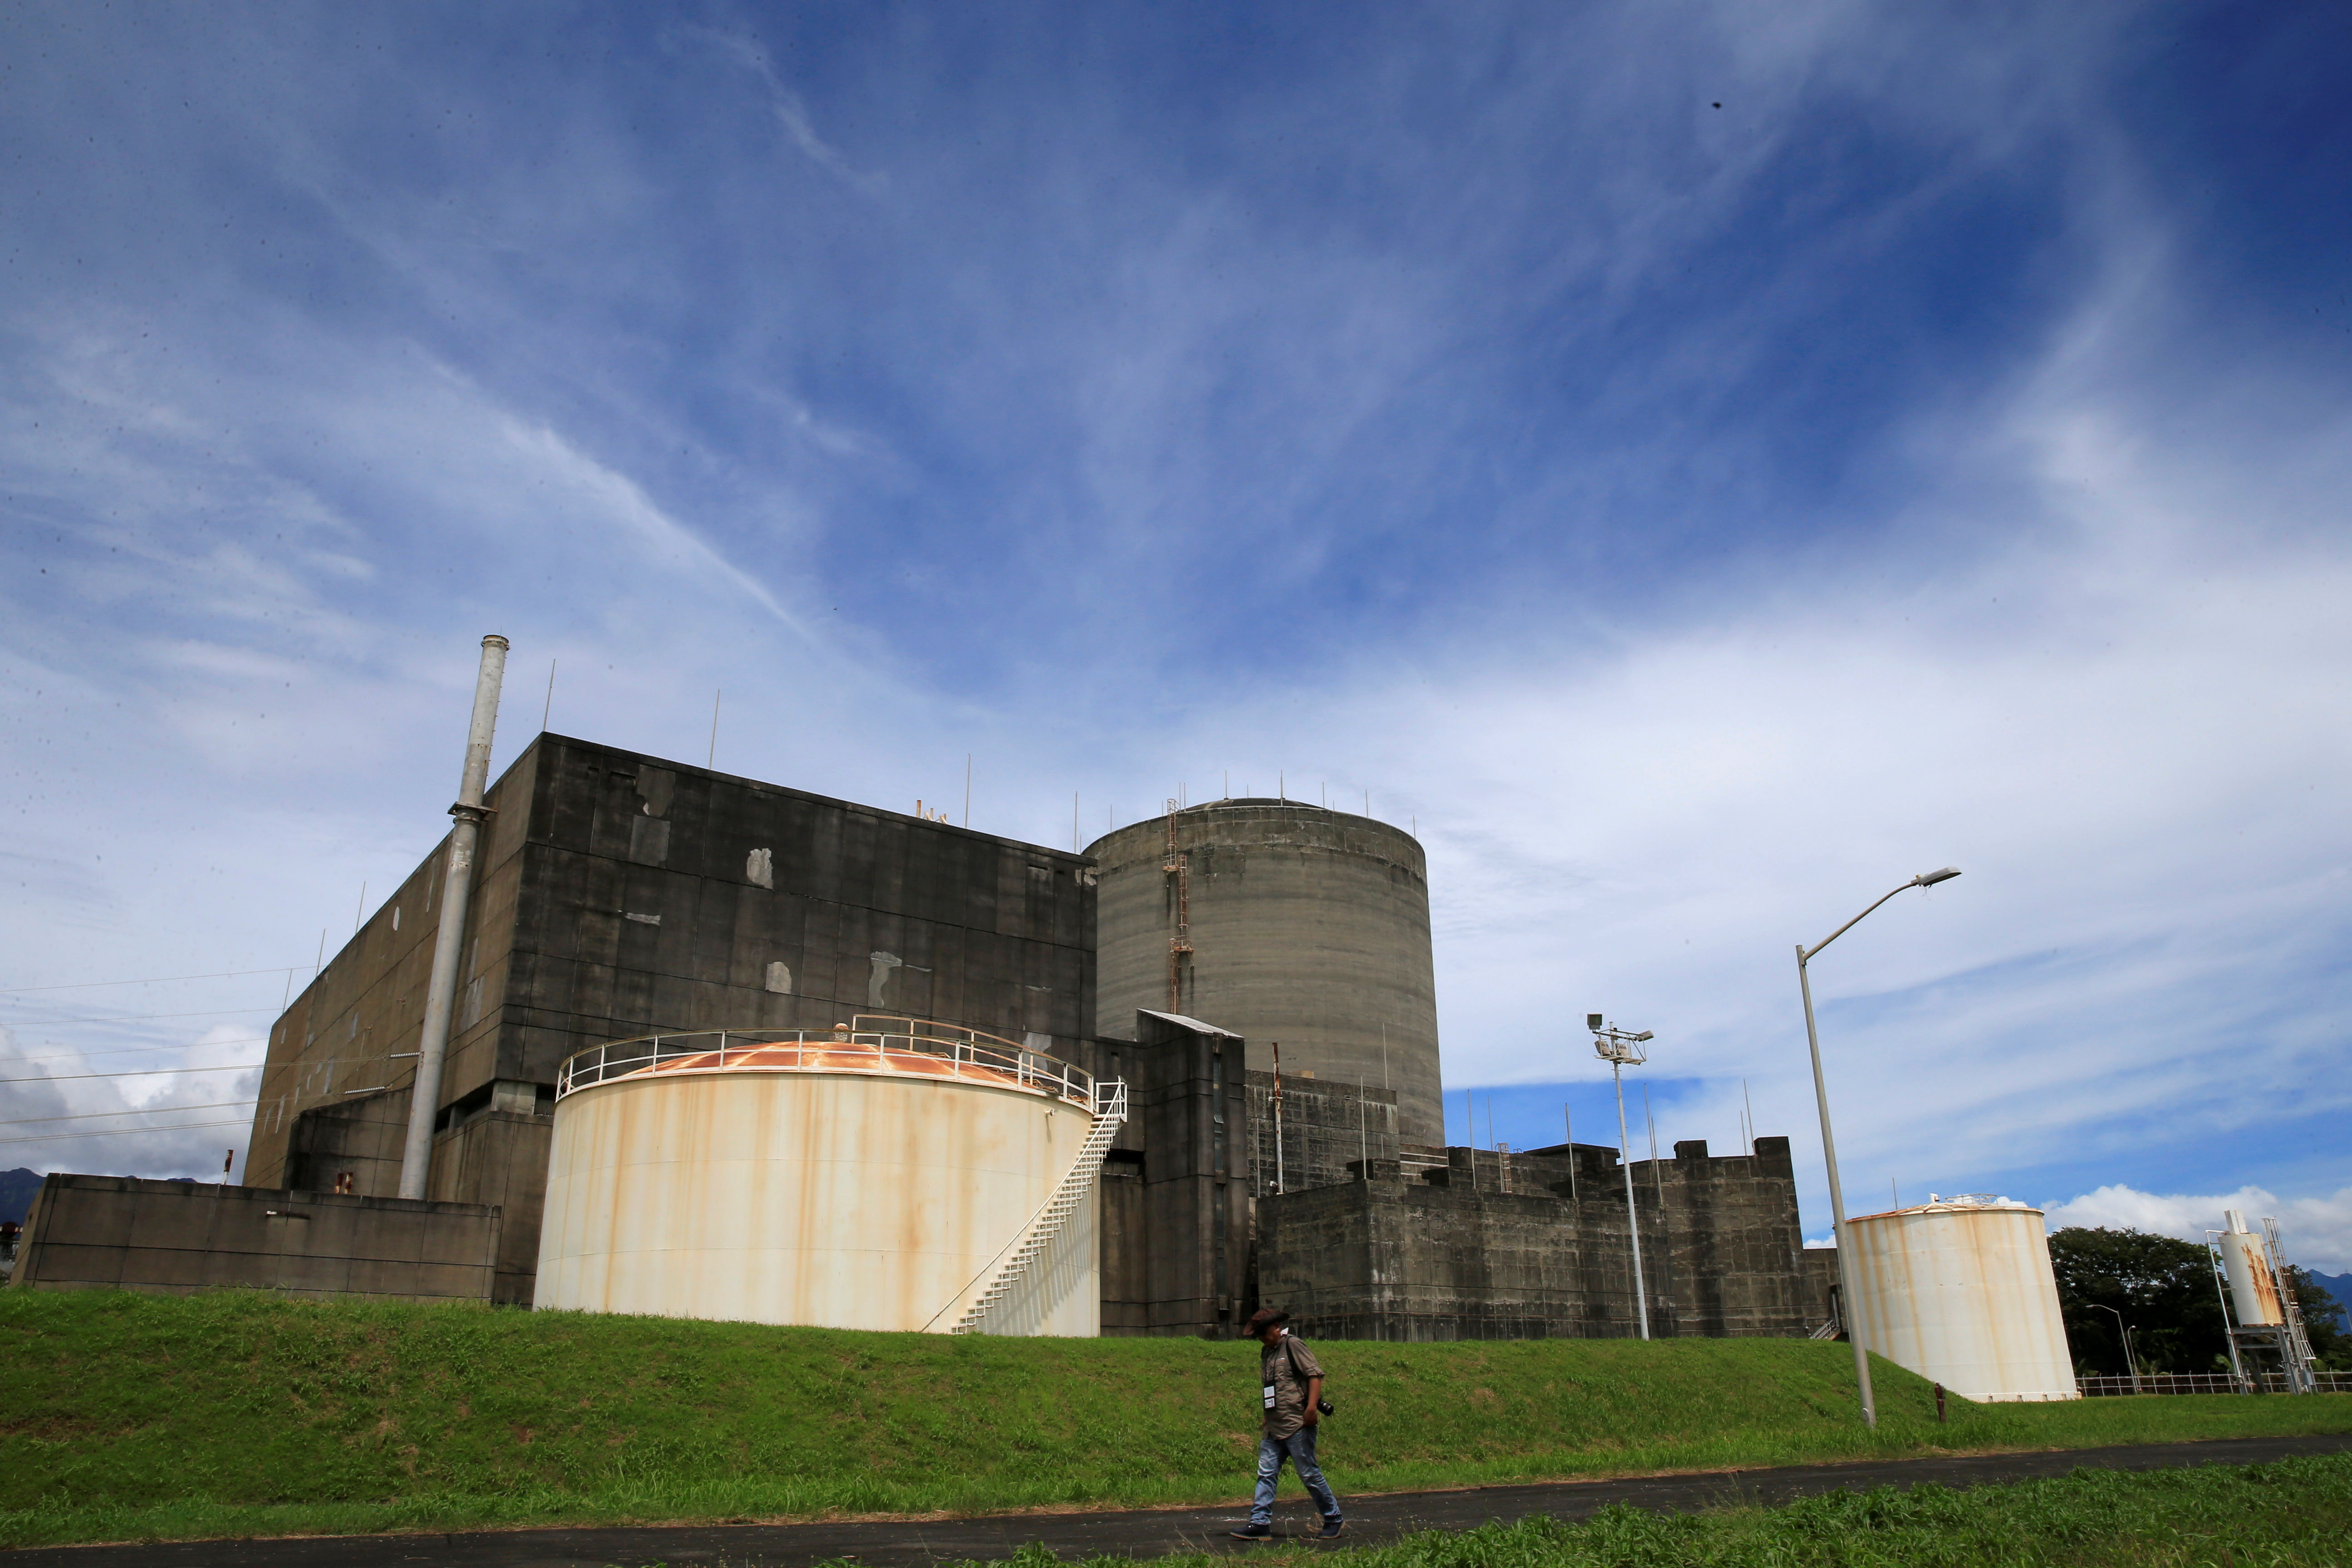 FILE PHOTO - A local photographer walks past the Bataan Nuclear Power Plant during a media tour around the BNPP compound in Morong town, Bataan province, Philippines